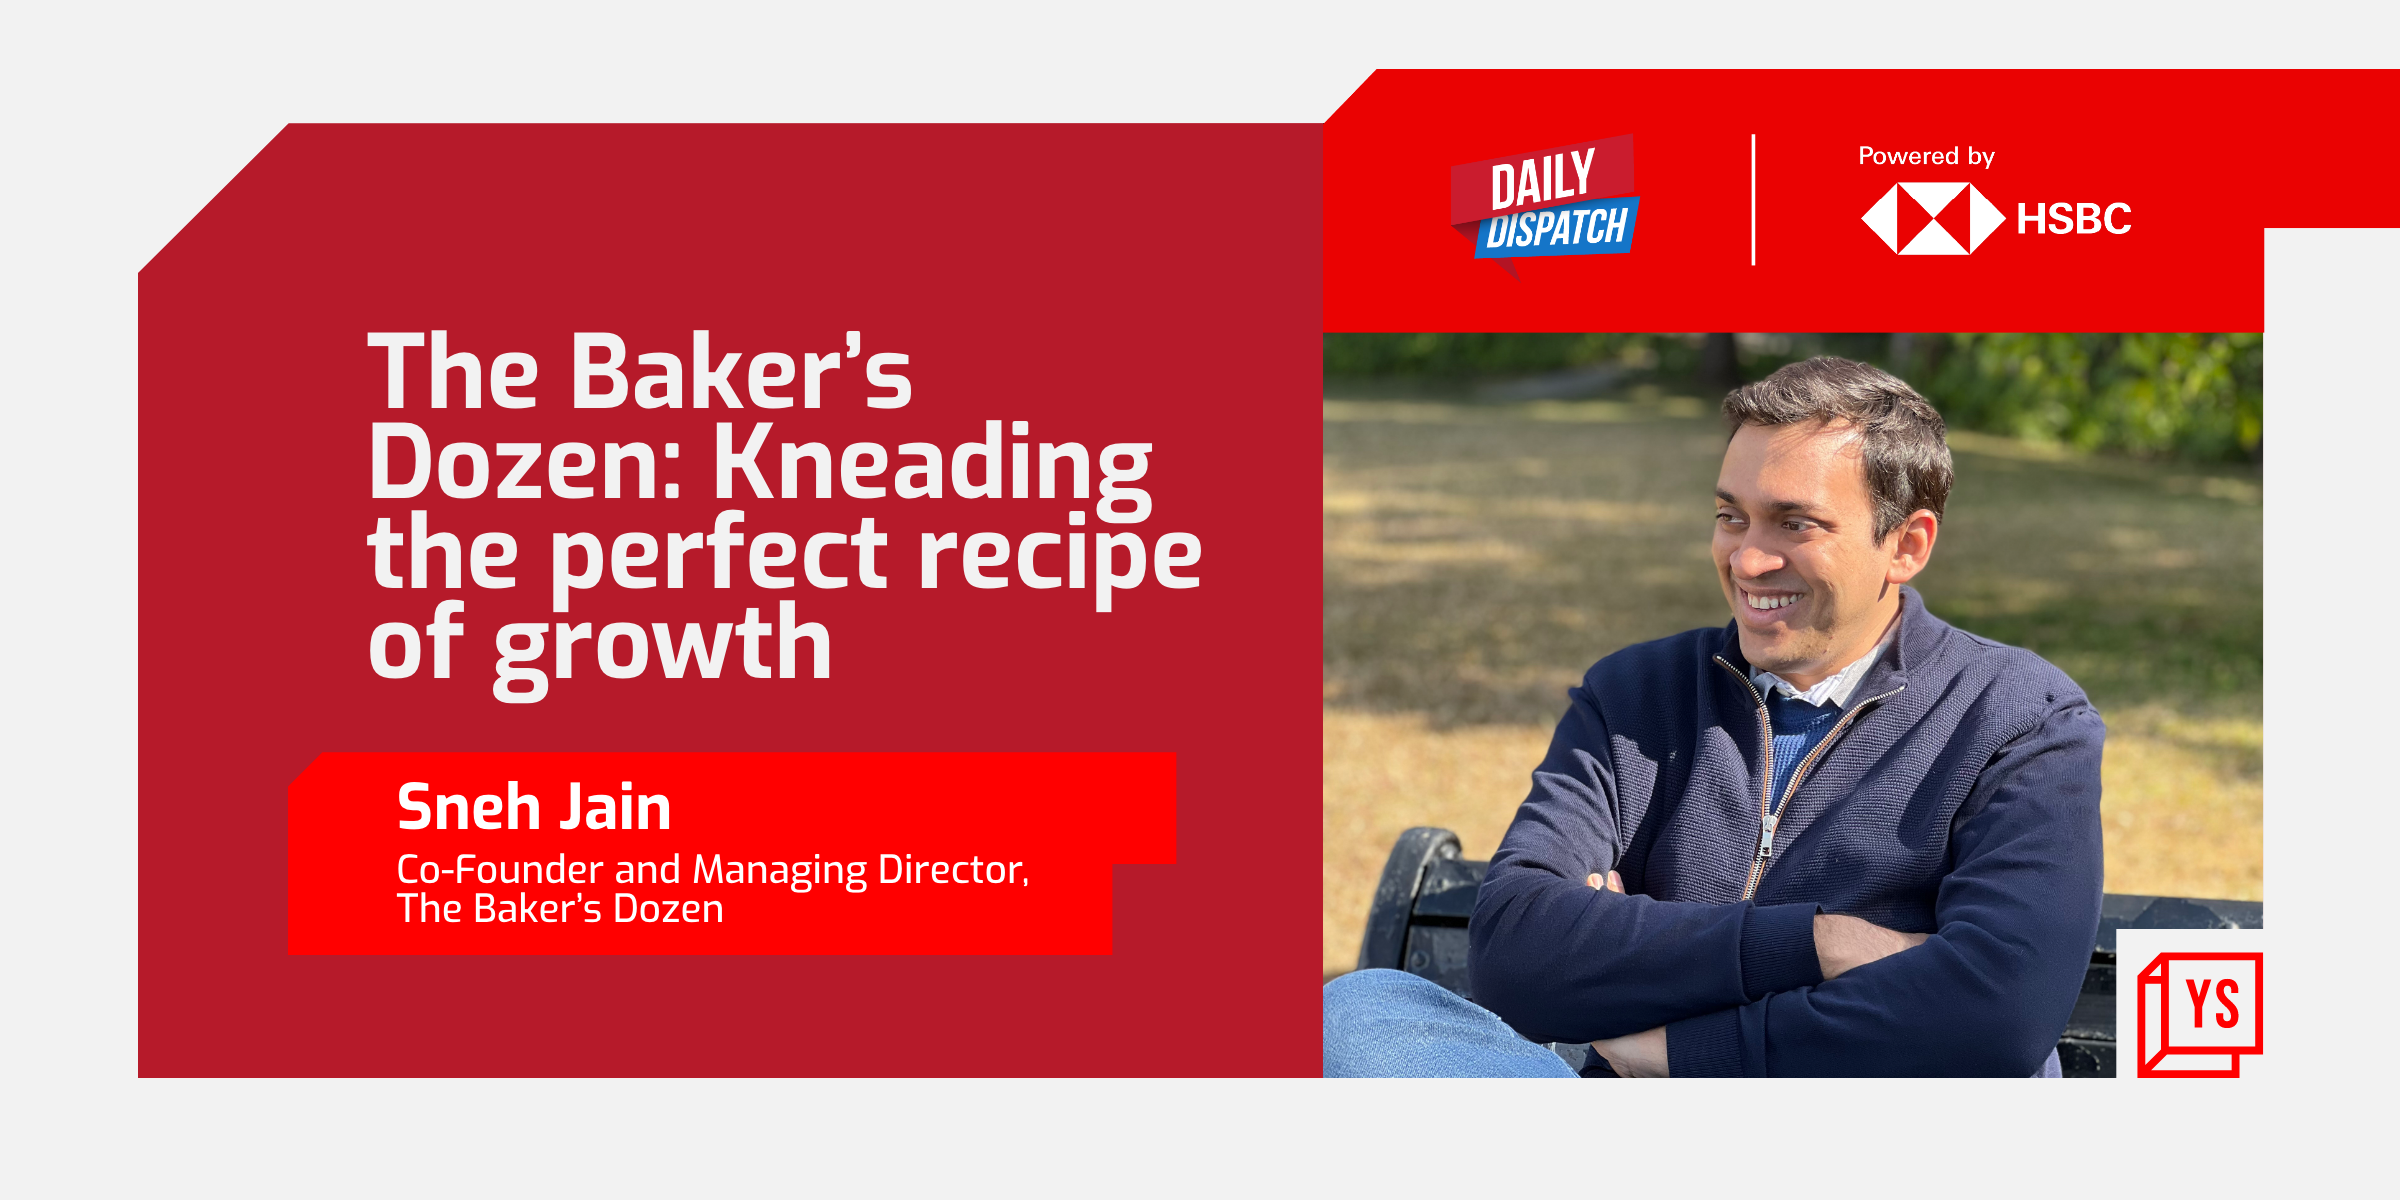 The Baker’s Dozen’s ambitious growth trajectory for the future 